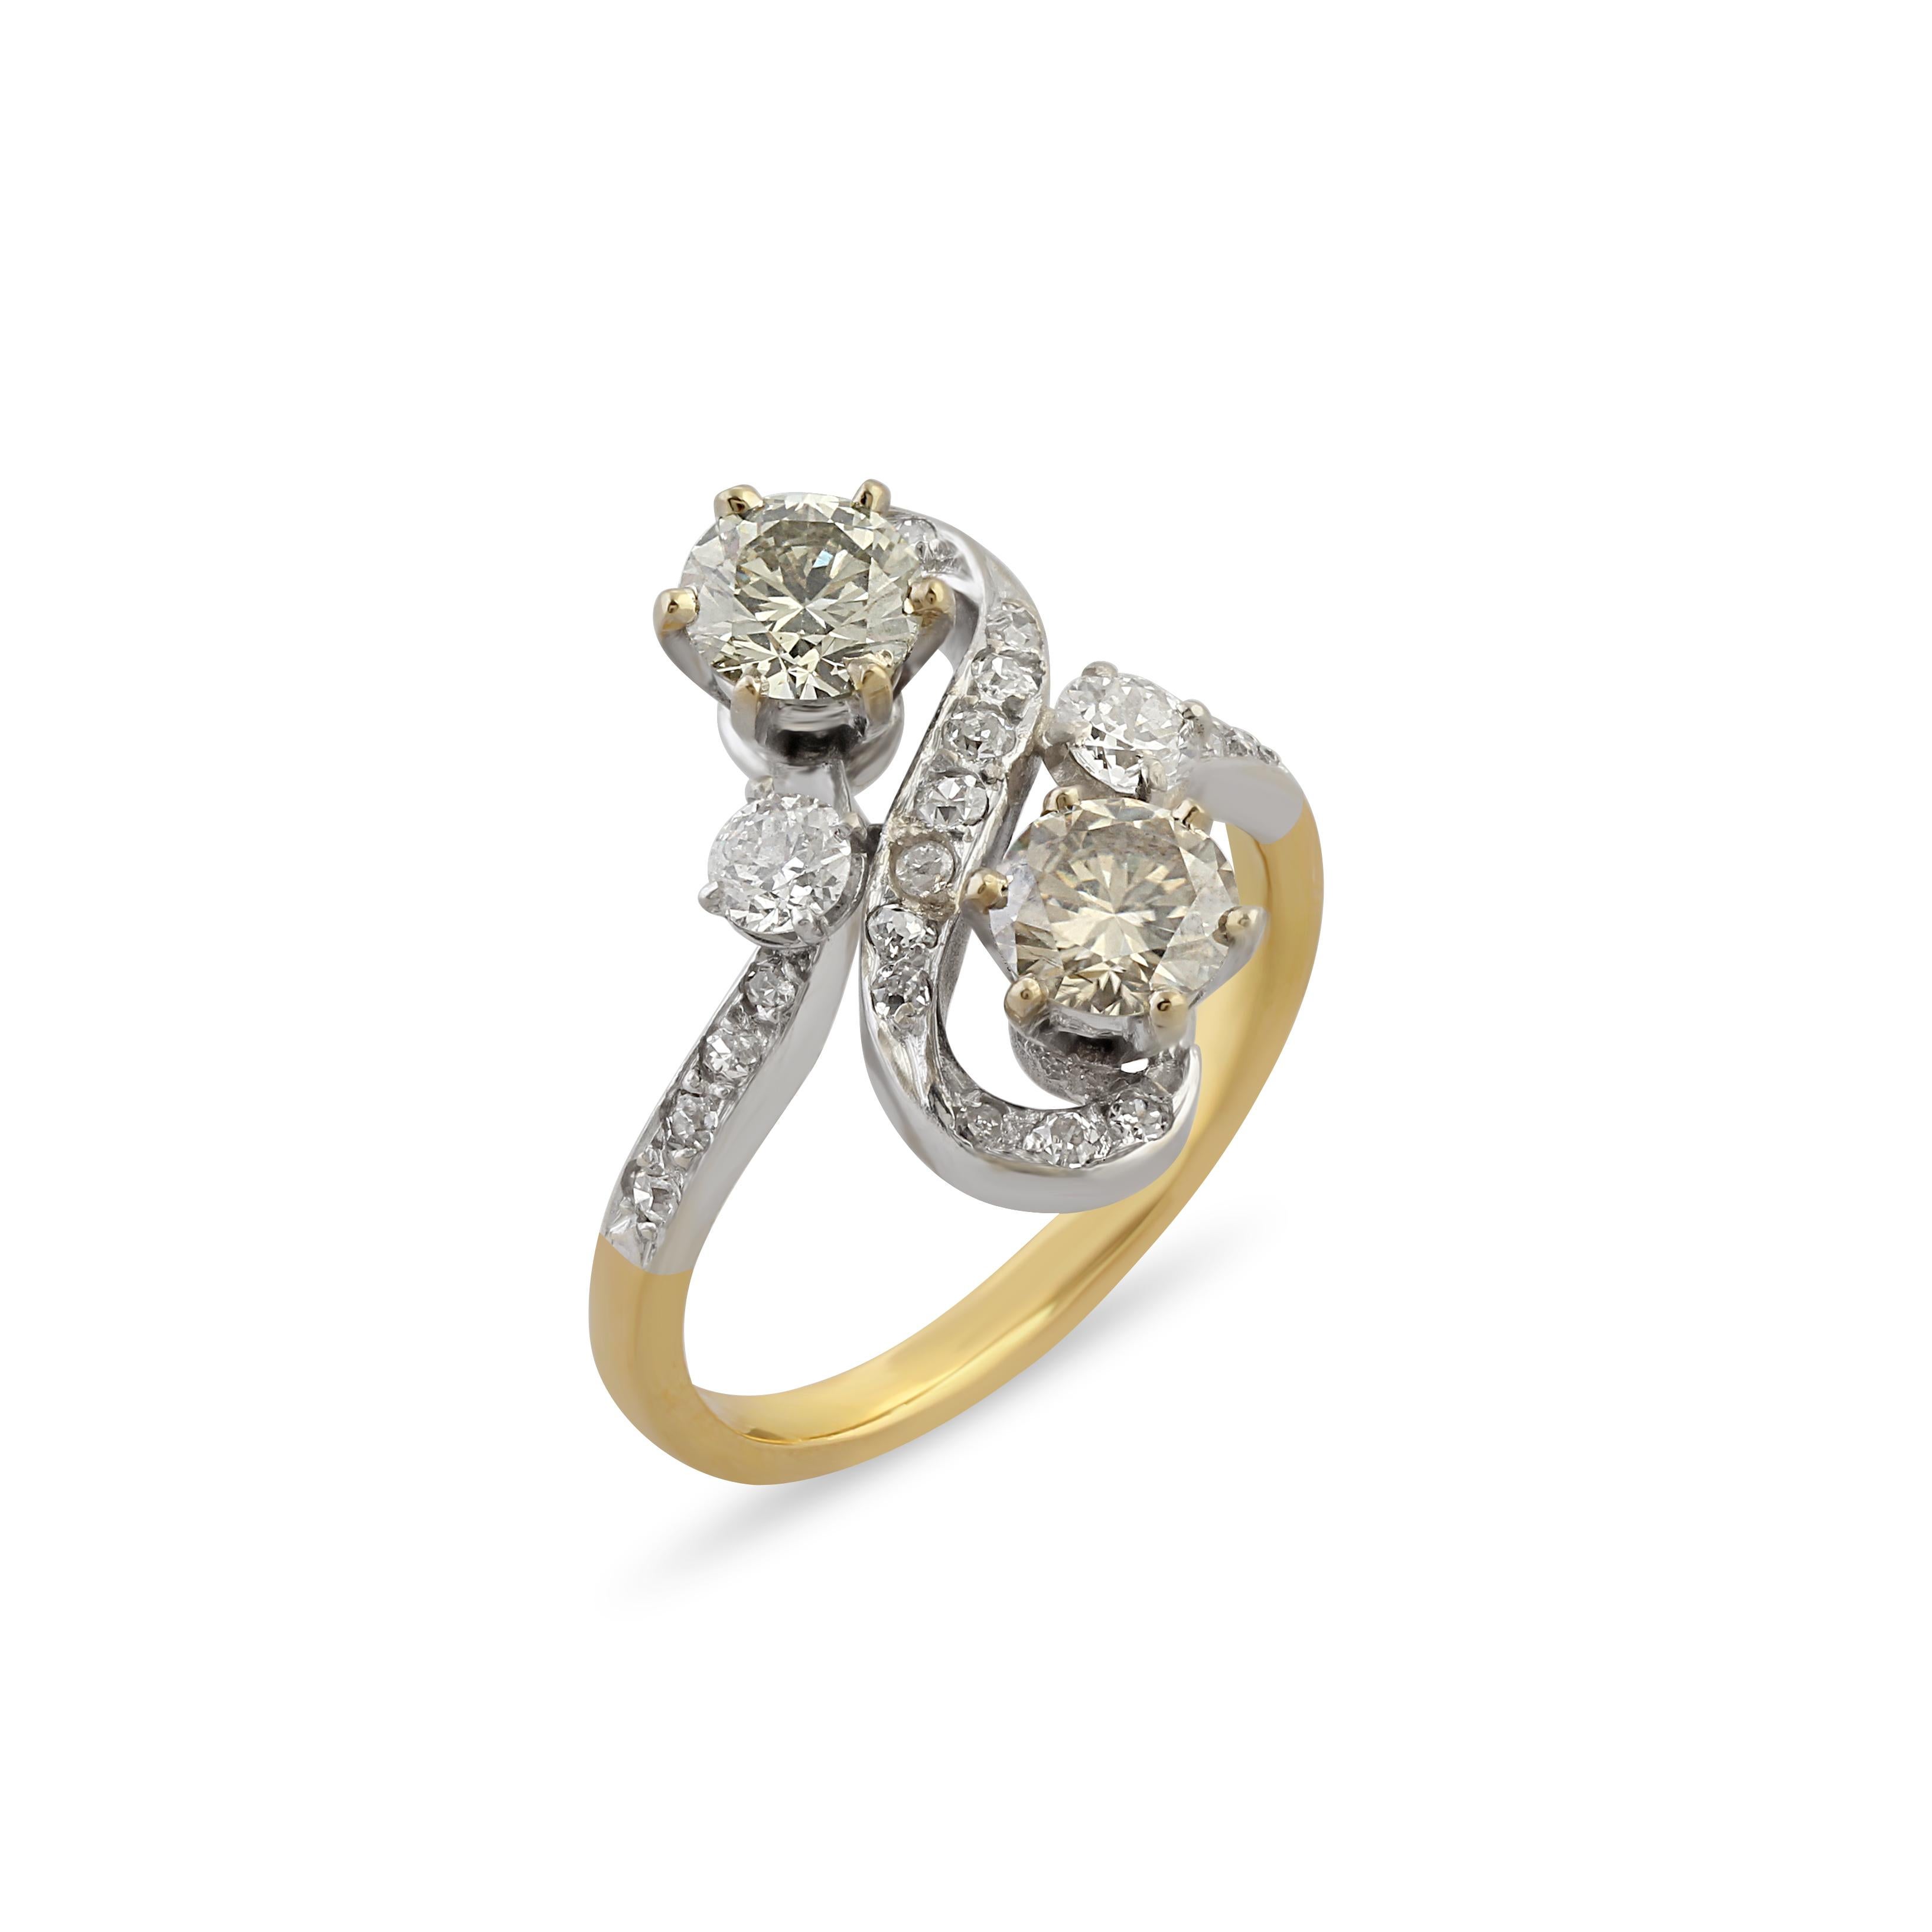 A platinum on gold toi et moi engagement ring, set with two old-cut diamonds of approximately 0.52 carats each surrounded by an additional 0.25 carats of diamonds. Circa 1900.